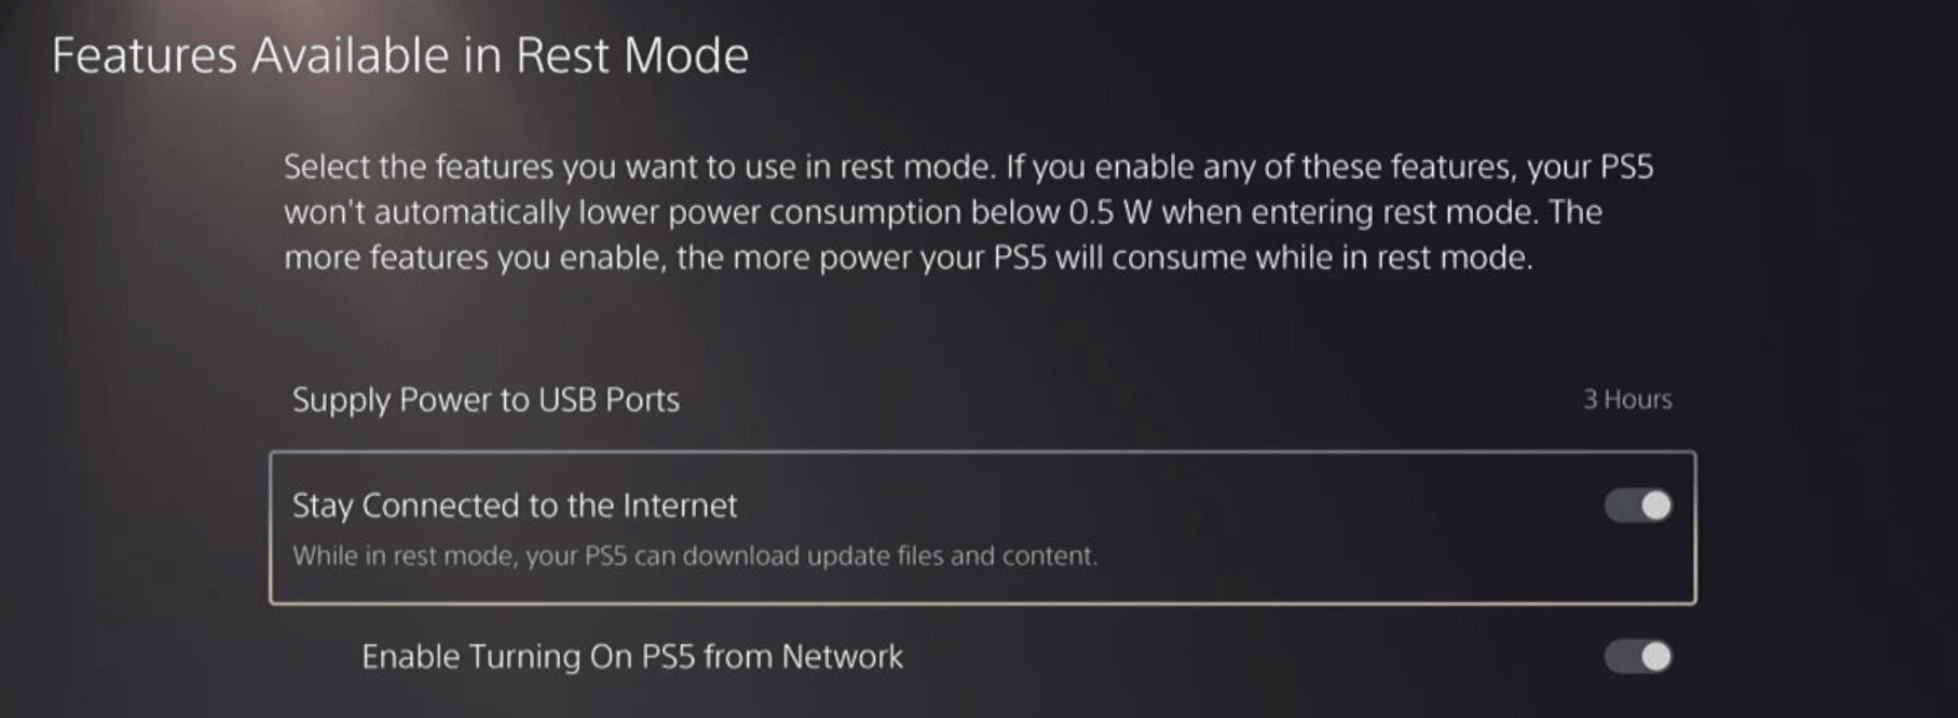 Stay Connected to the Internet is toggled in PS5 rest mode settings menu to enable automatic updates of Just Dance 2022